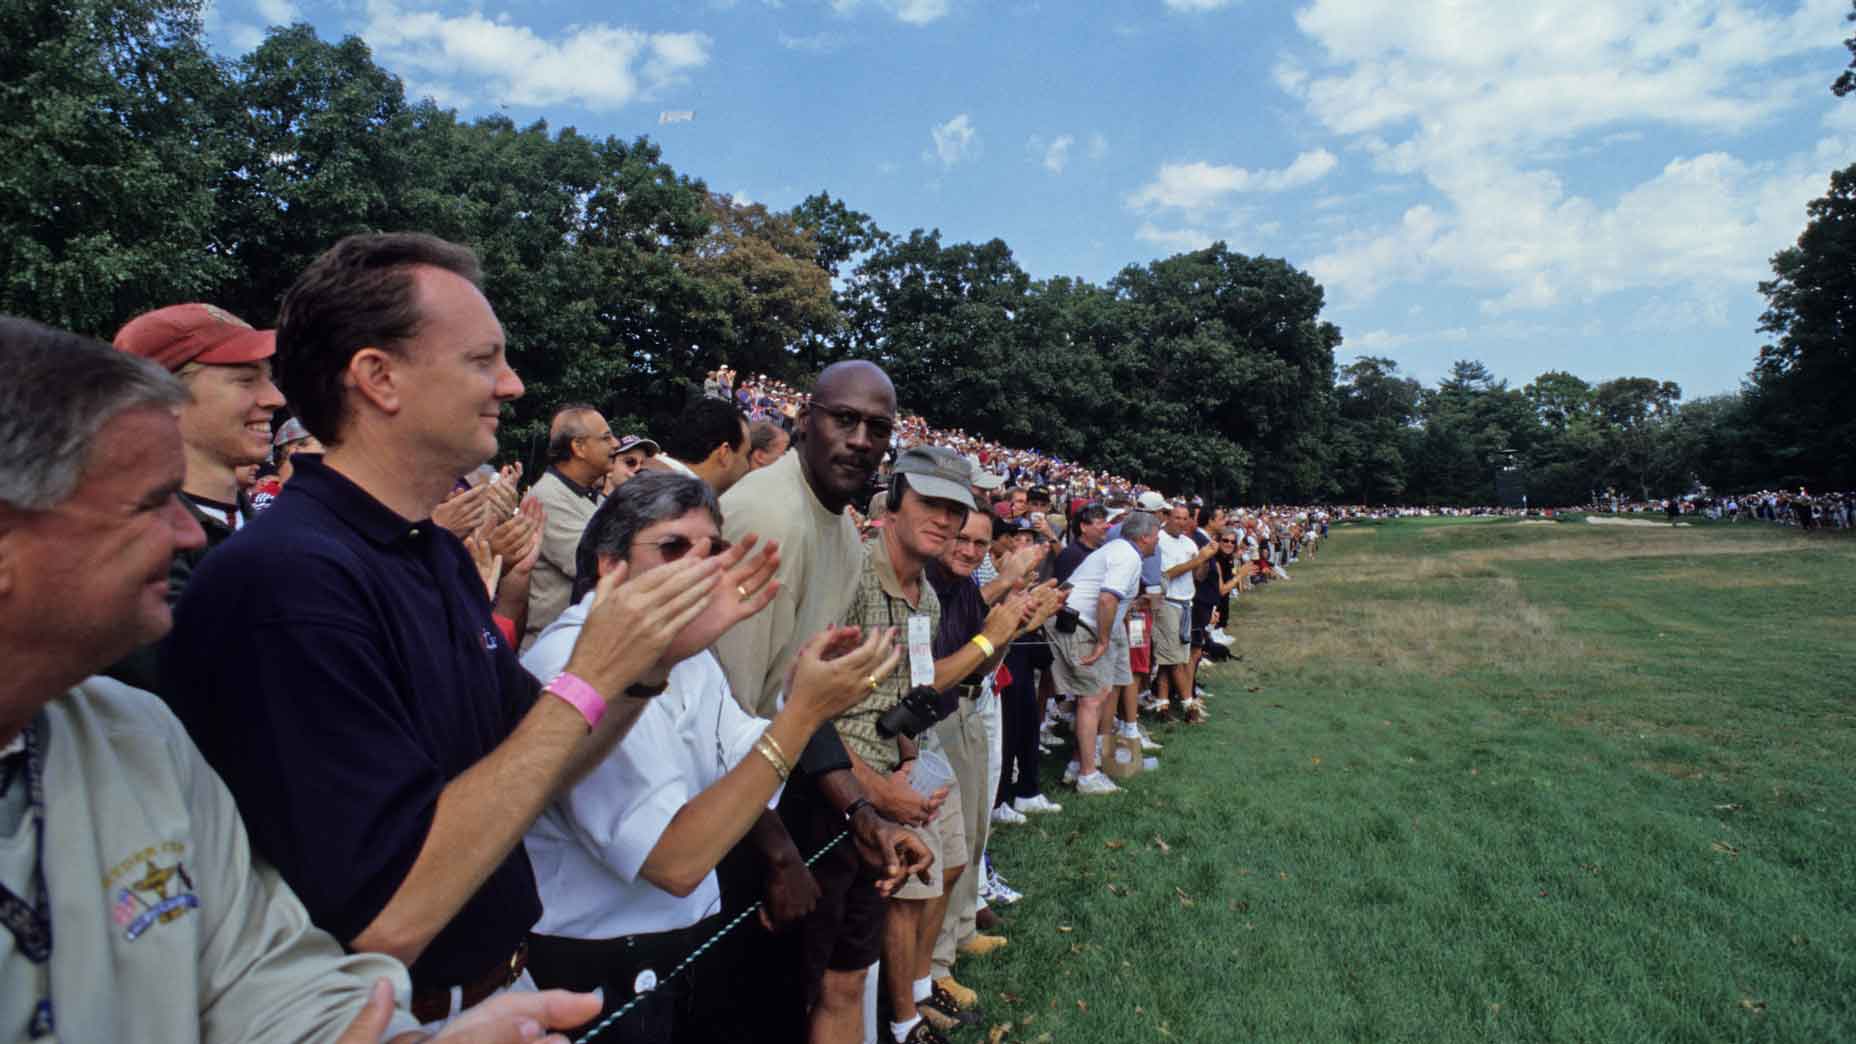 Ryder Cup's biggest fan over the years? It might Michael Jordan